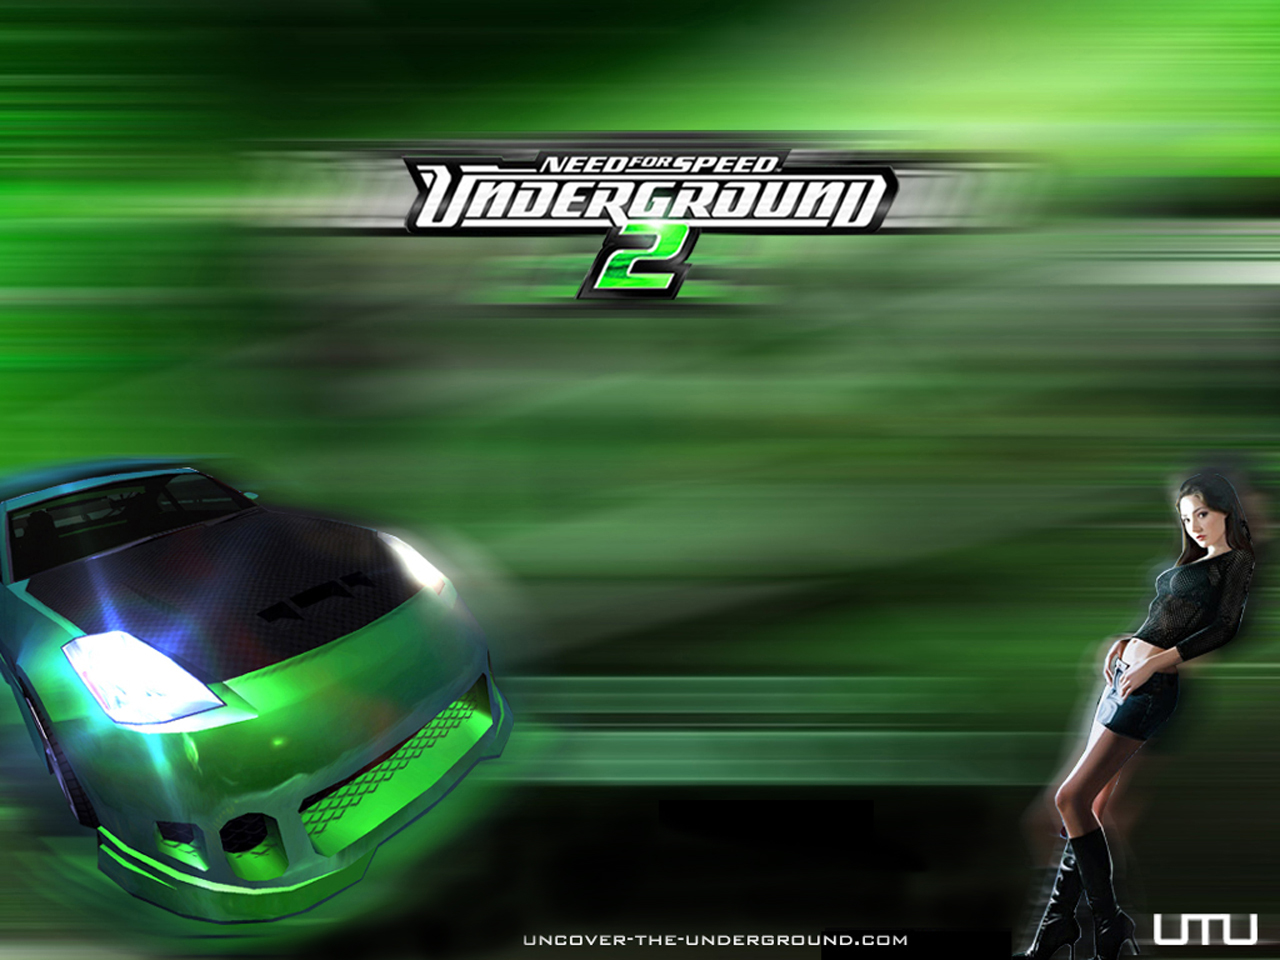 Click To View The Image In Full Size - Nfs Underground Background Hd - HD Wallpaper 